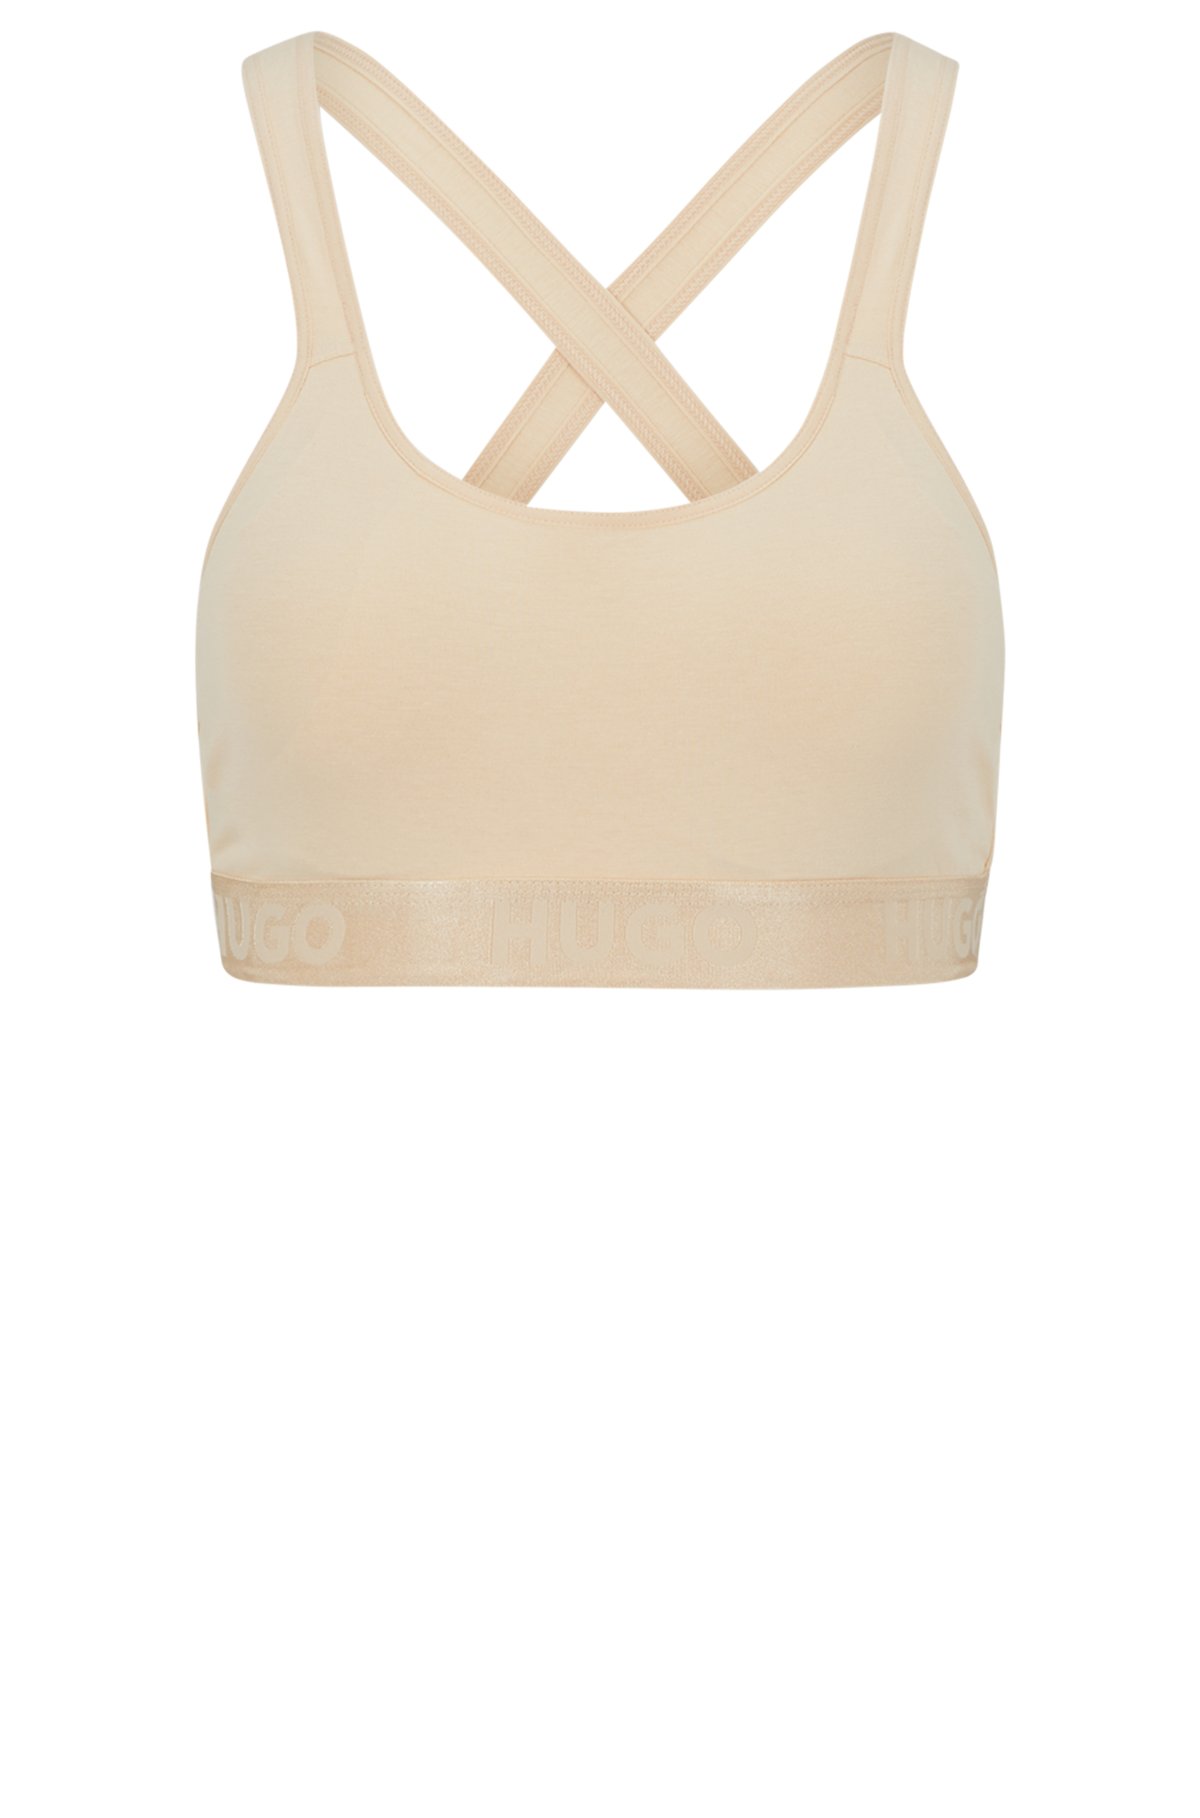 with HUGO - logos Bralette repeat stretch cotton in